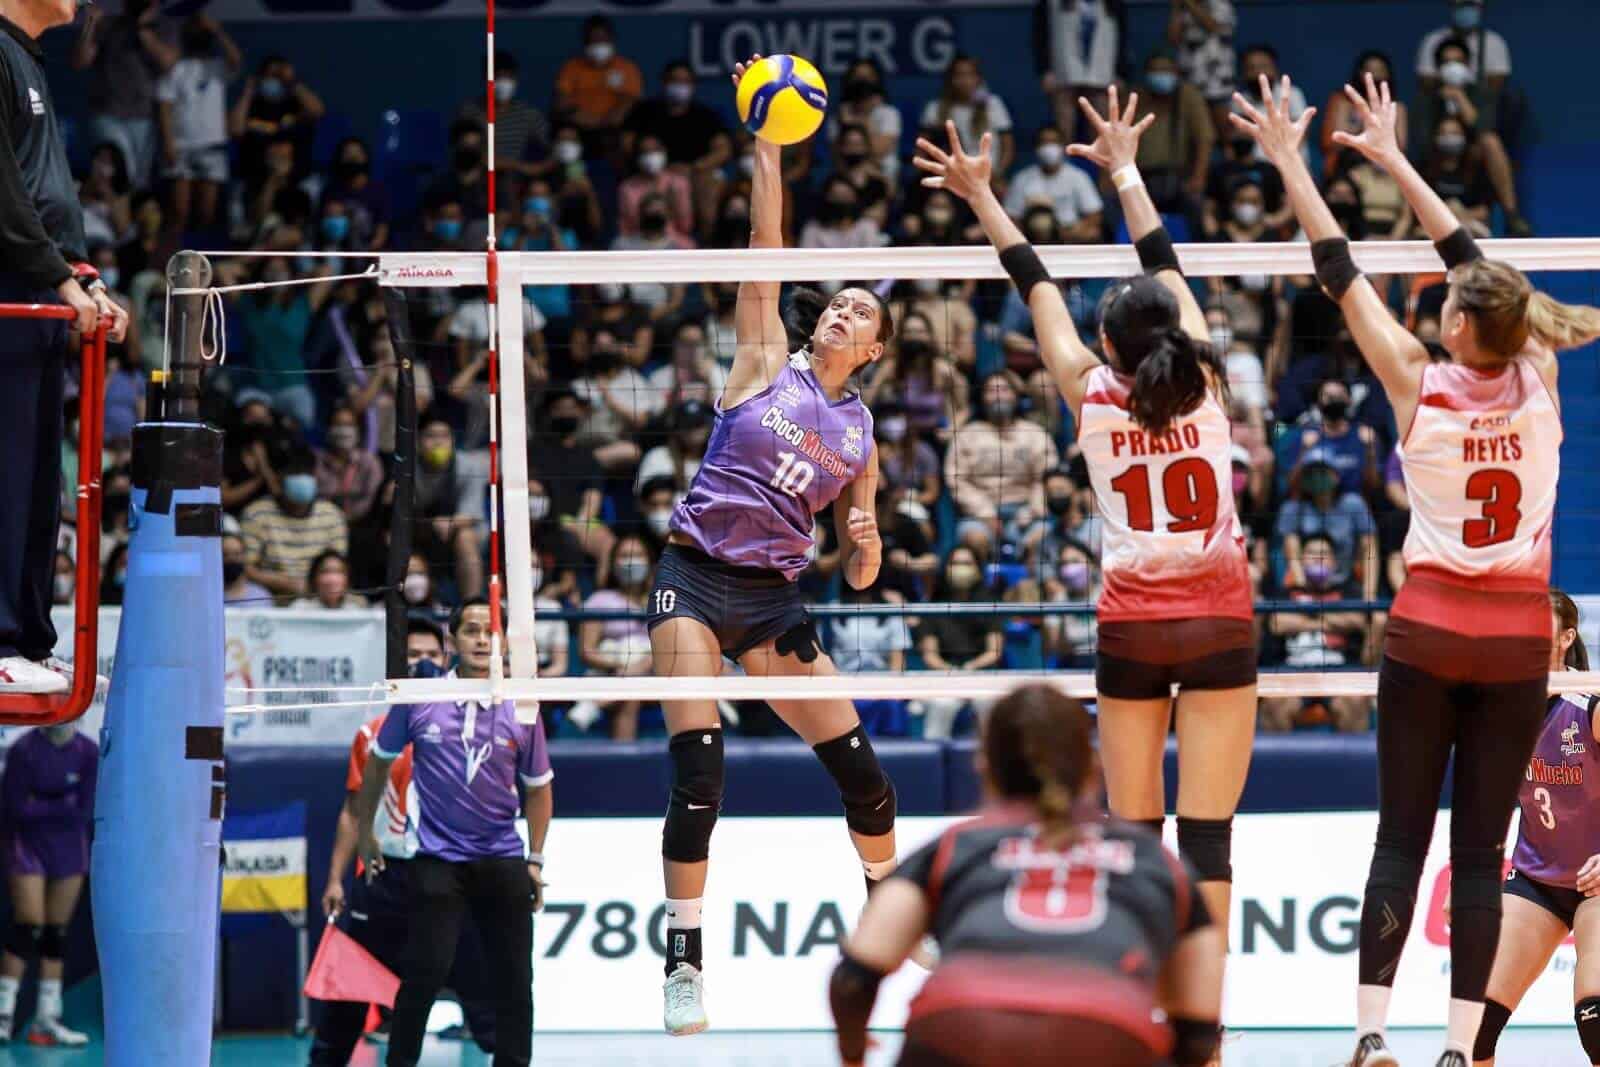 A group of female volleyball players edge PLDT in a thrilling five-set match to move on to PVL semis.